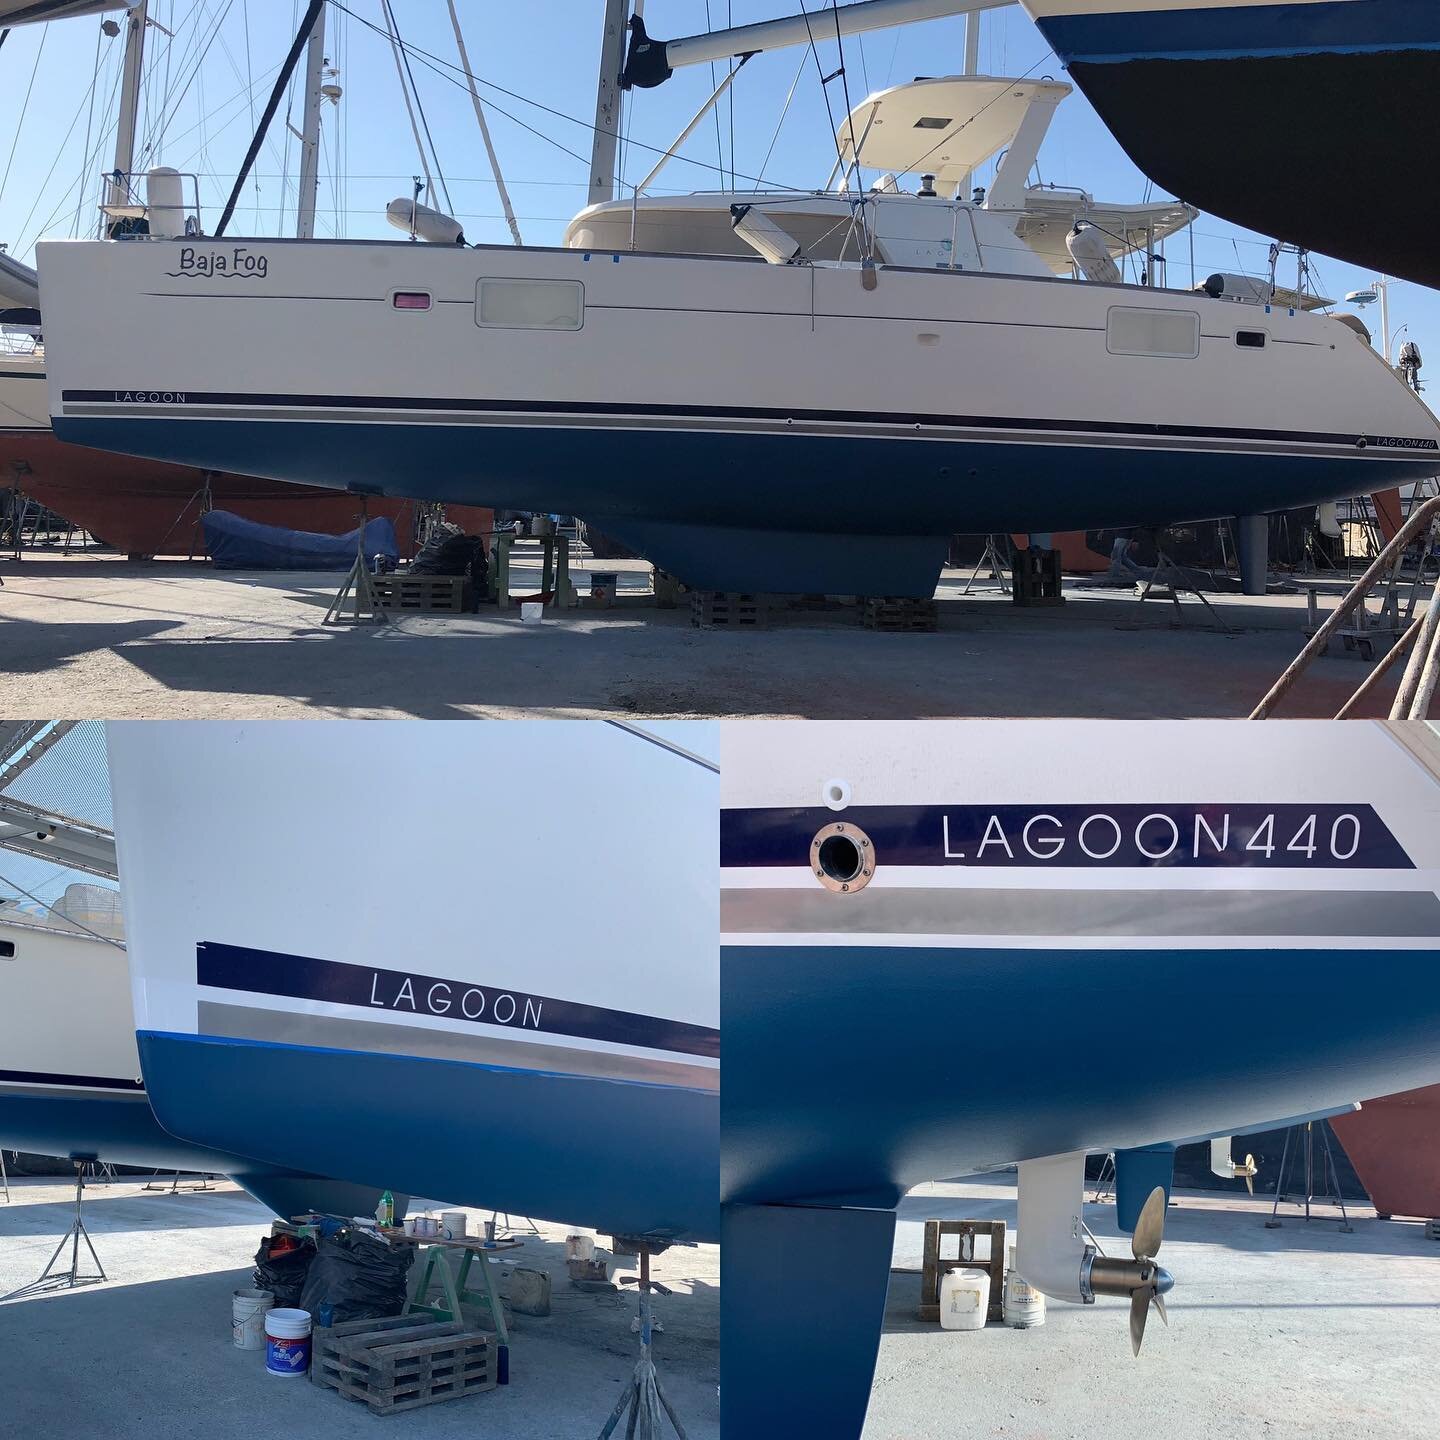 Almost ready to go back in the water! Beautiful new stripe, lowered waterline and fresh bottom paint on gel coat just like new! They guys at SeaTek did a fantastic job! Muchas gracias!🇲🇽⛵️#lagoon440 #lagoon440ownersversion